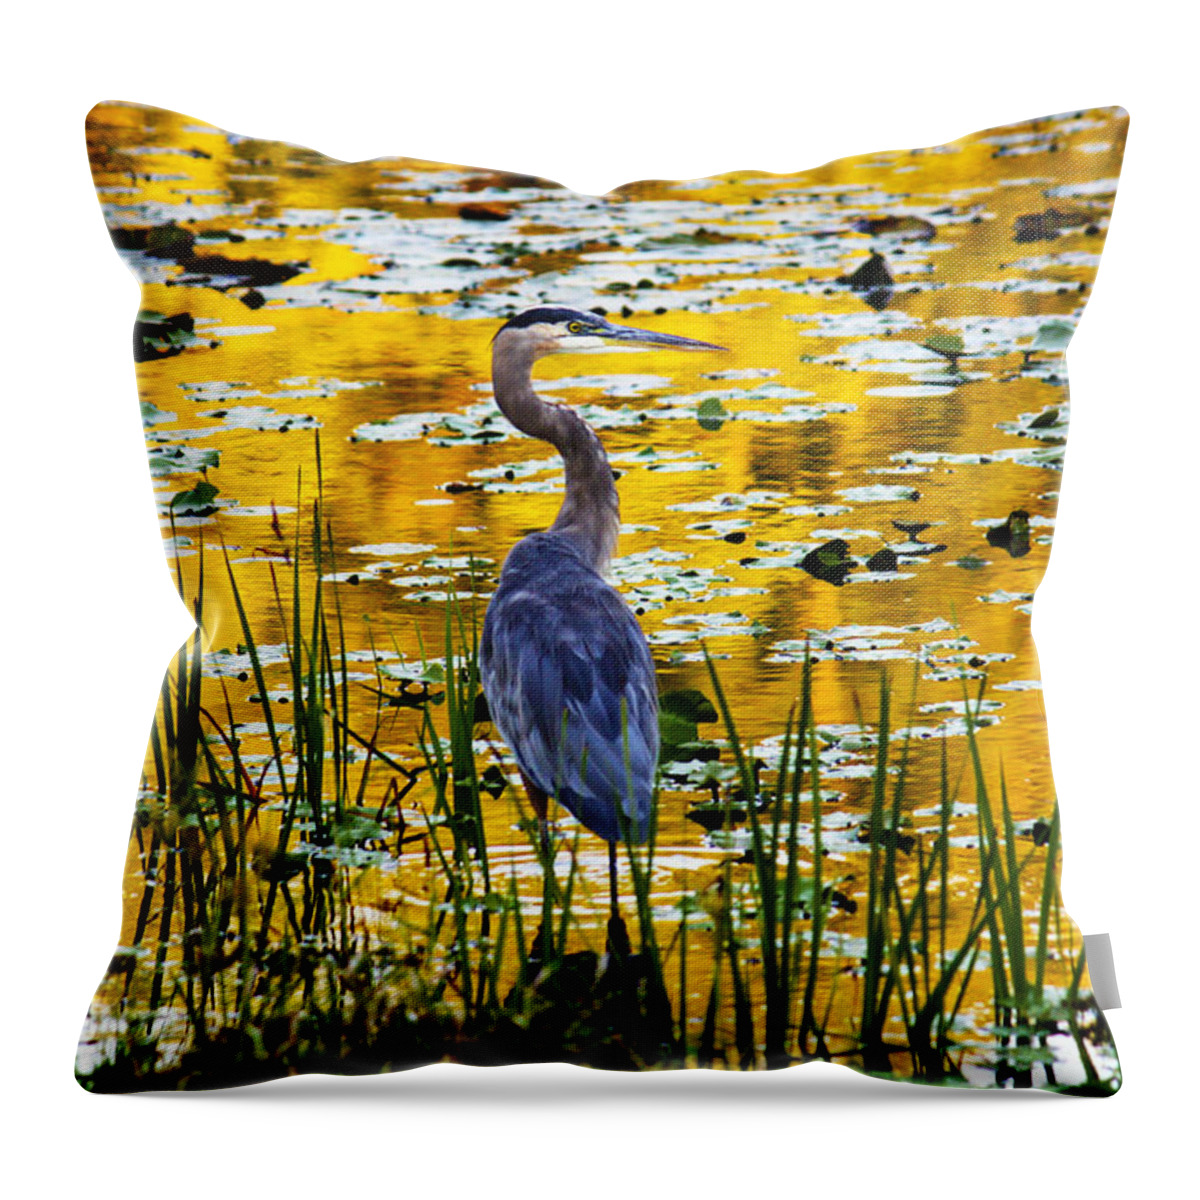 Blue Heron Throw Pillow featuring the photograph Blue Heron In A Golden Pond by Marina Kojukhova